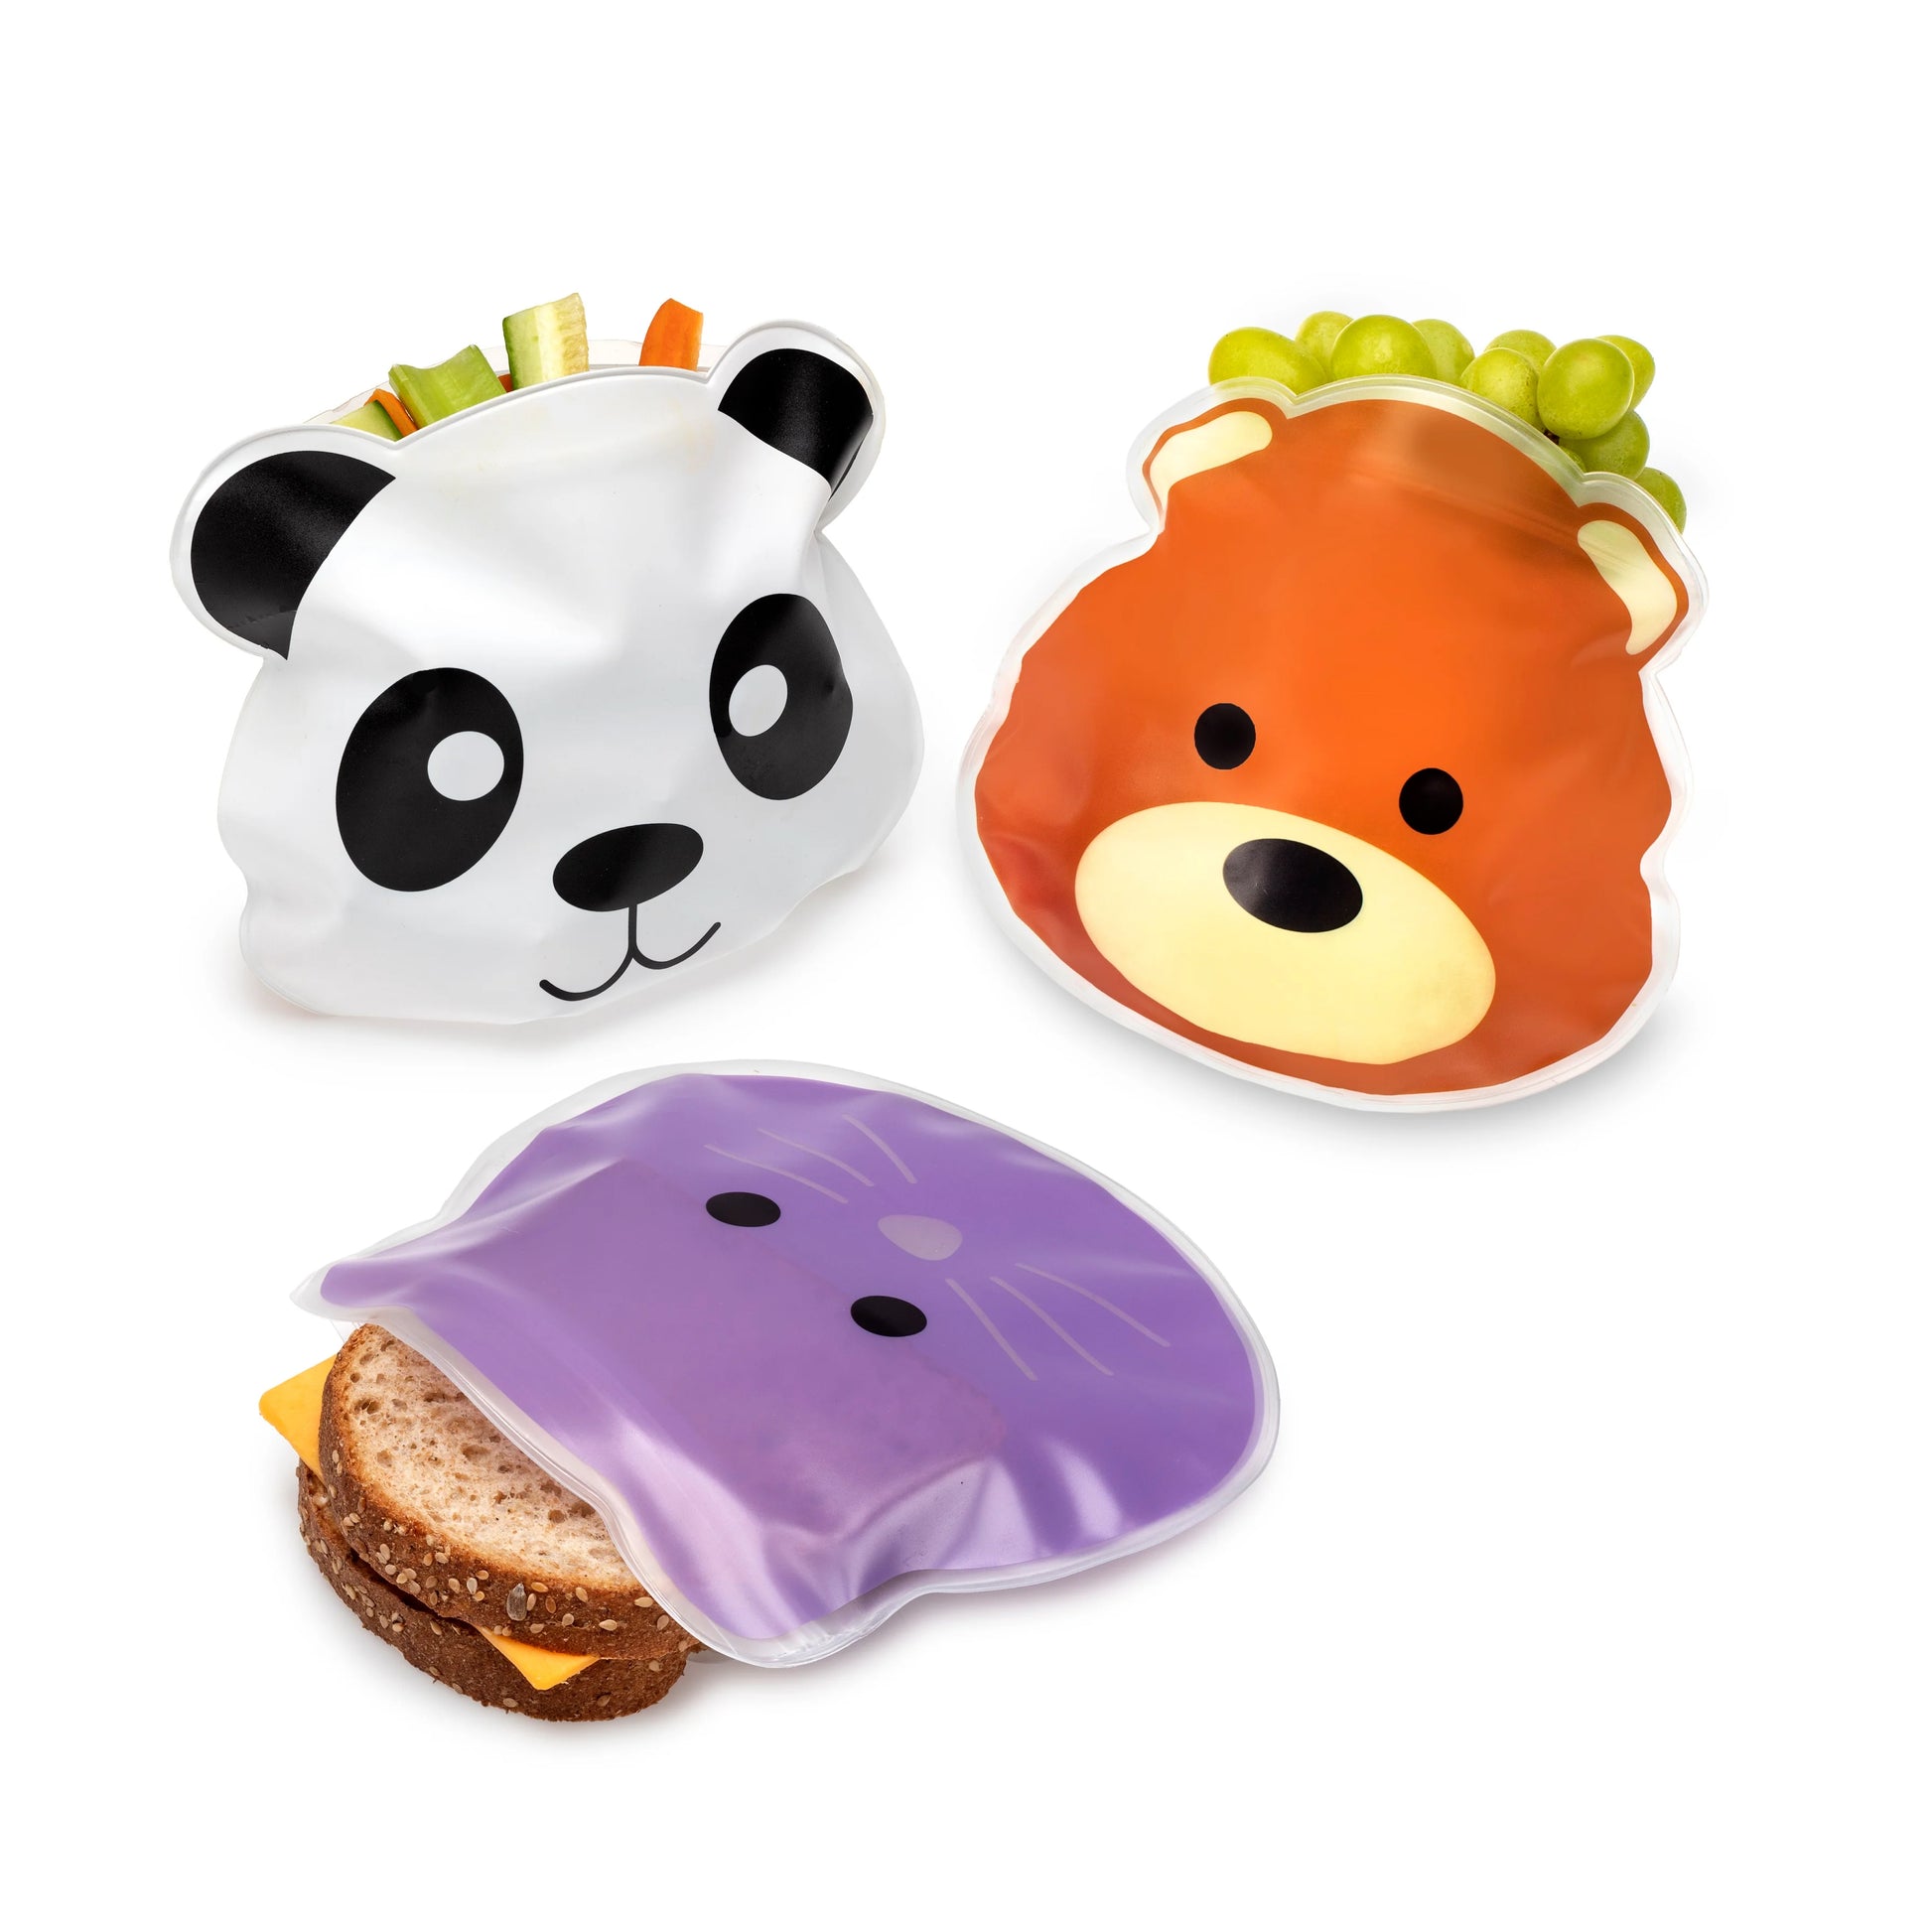 Melii Reusable Snack Bags - Set of 6 Adorable Animal Character Bags with Zip Leak-Proof Seal - Eco-Friendly, BPA-Free, Washable, and Perfect for On-the-Go Snacking